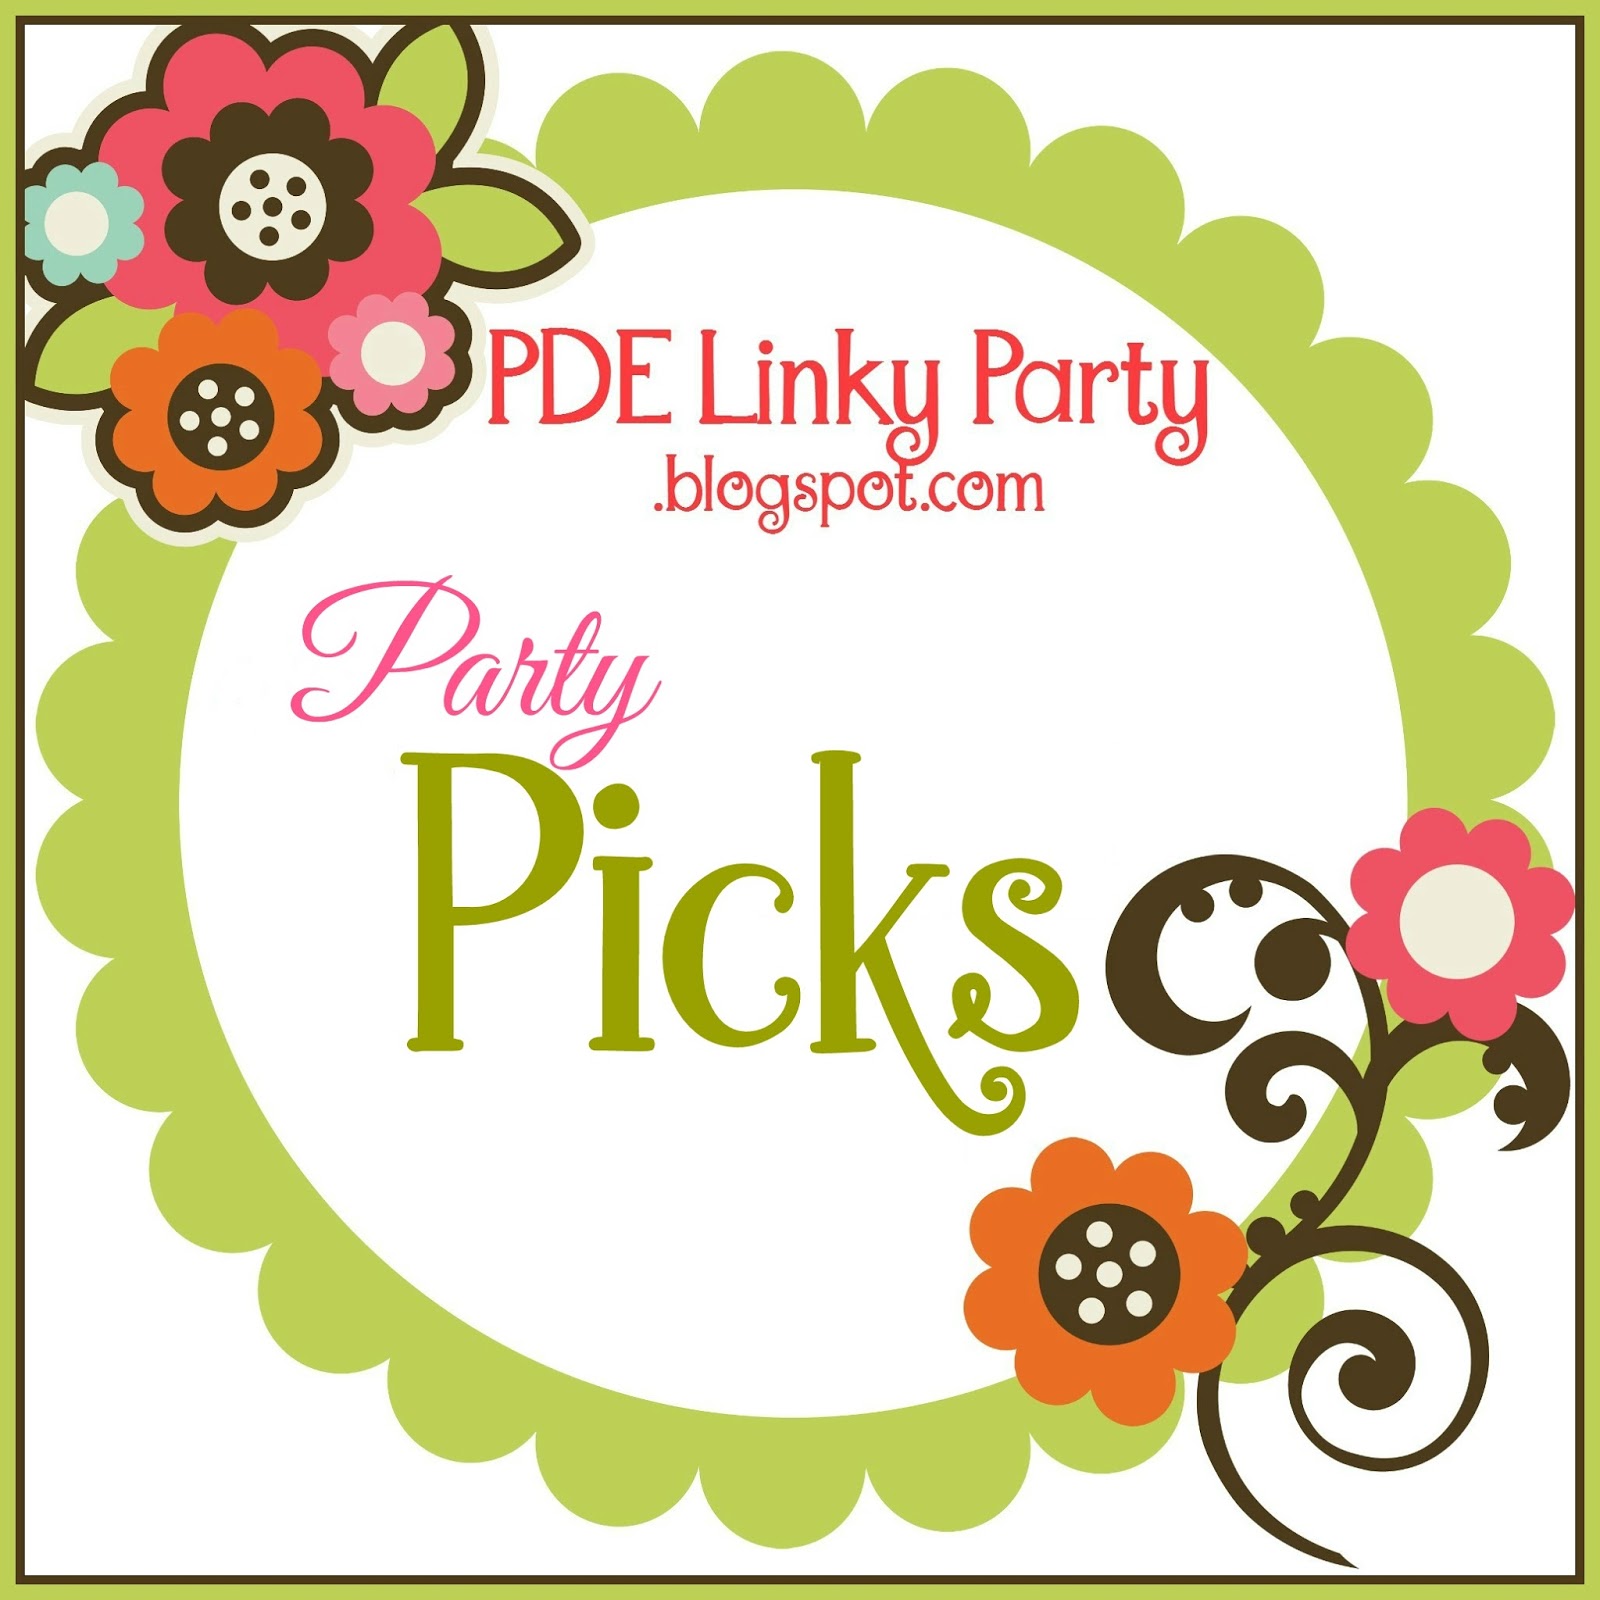 One of the top 5 picks @ PDE Linky